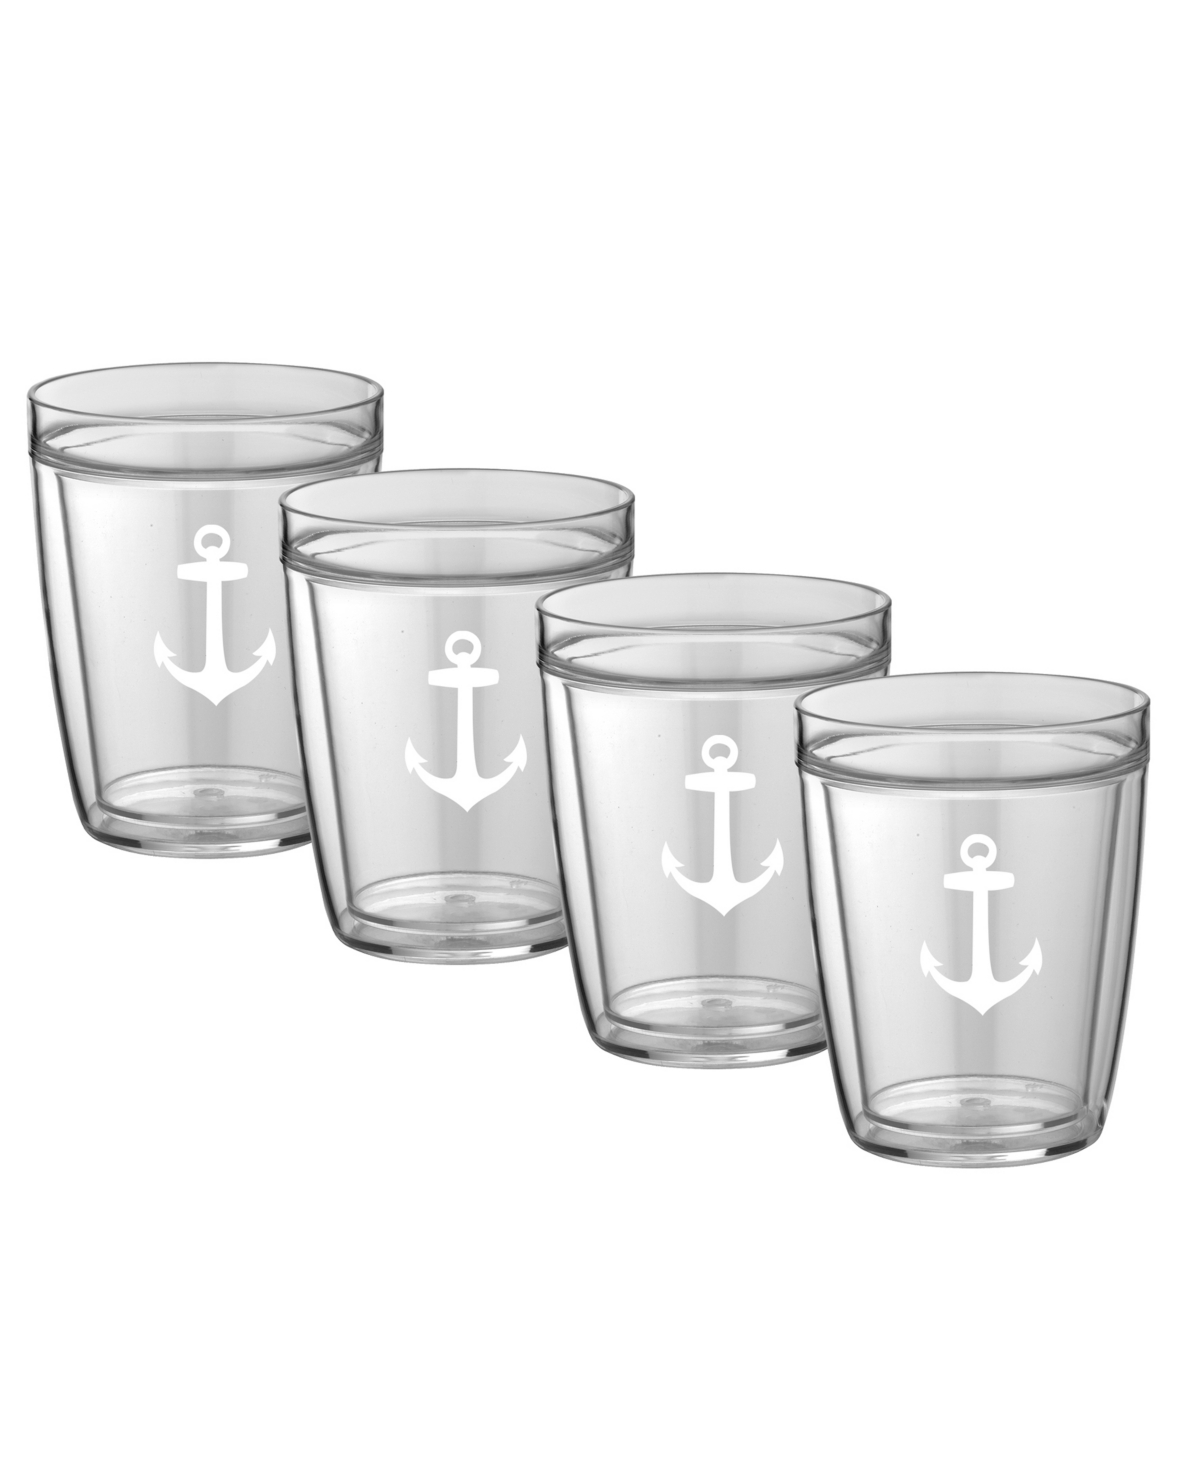 Pastimes 14 Oz Double Old Fashioned Short Drinking Anchor Glass, Set of 4